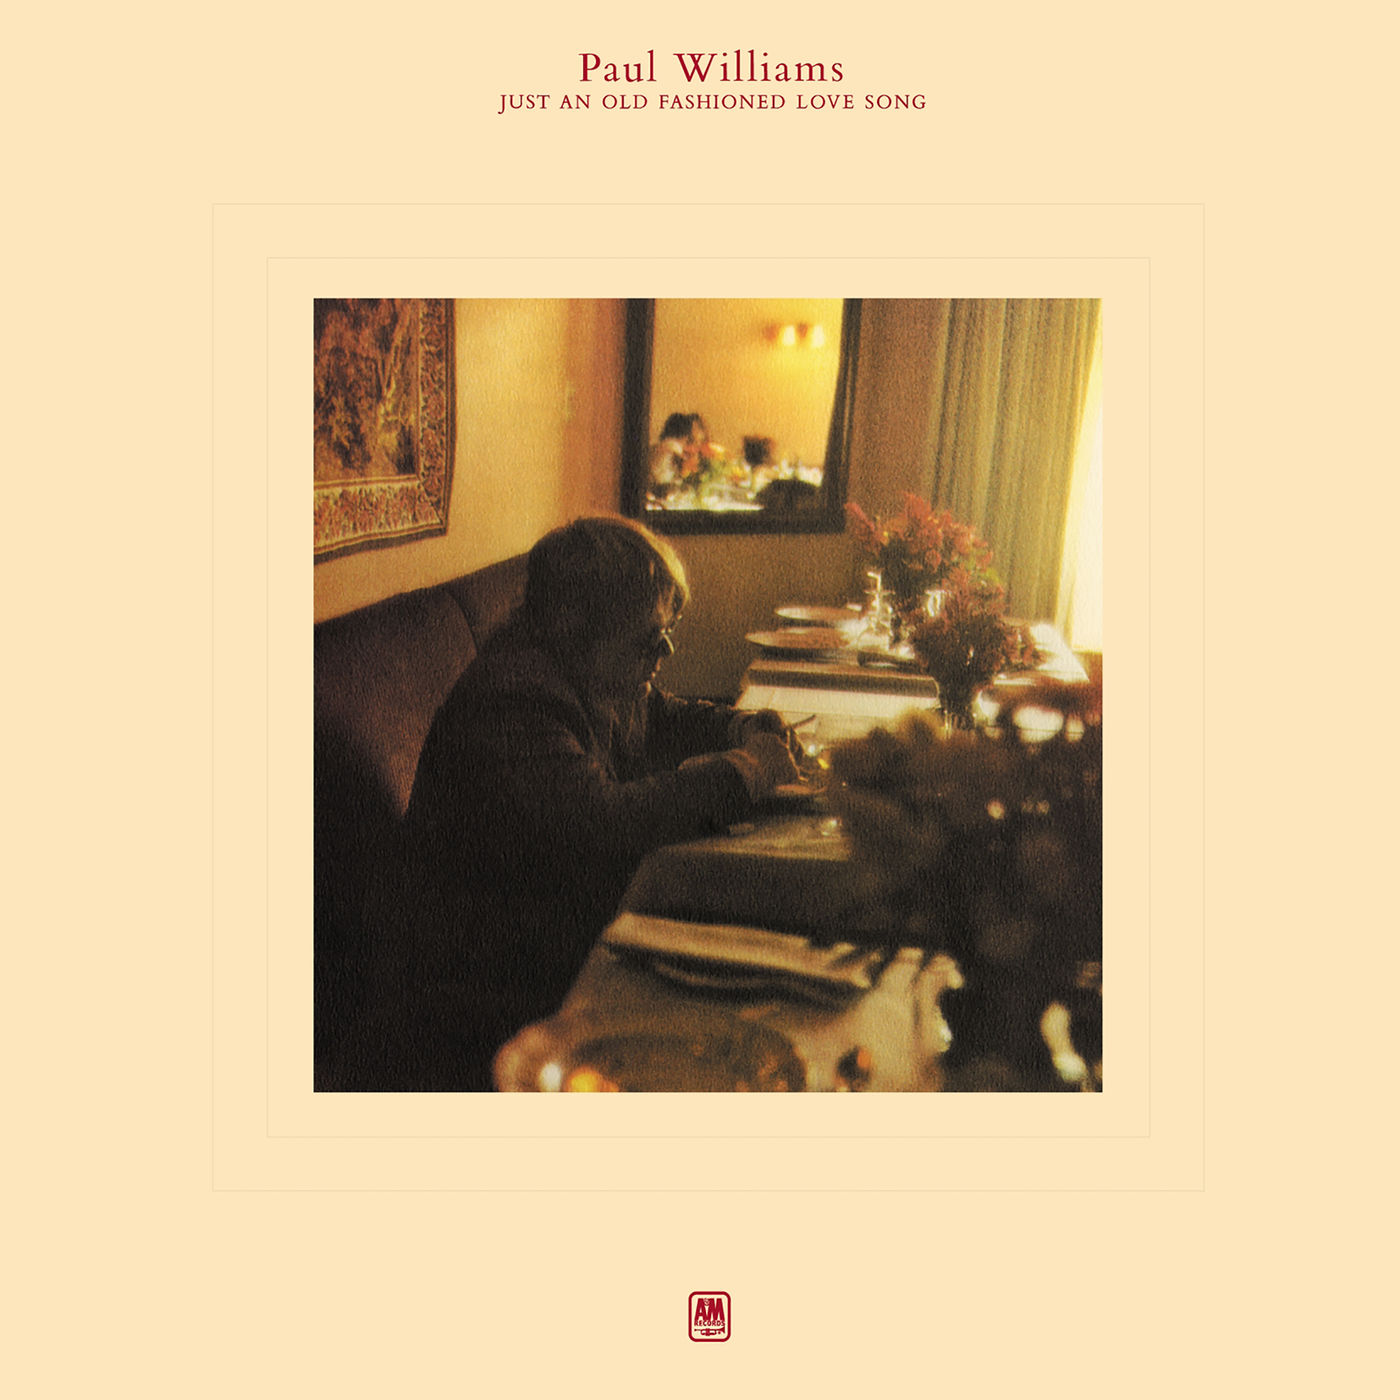 Paul Williams - Just An Old Fashioned Love Song (1971/2021) [FLAC 24bit/96kHz]